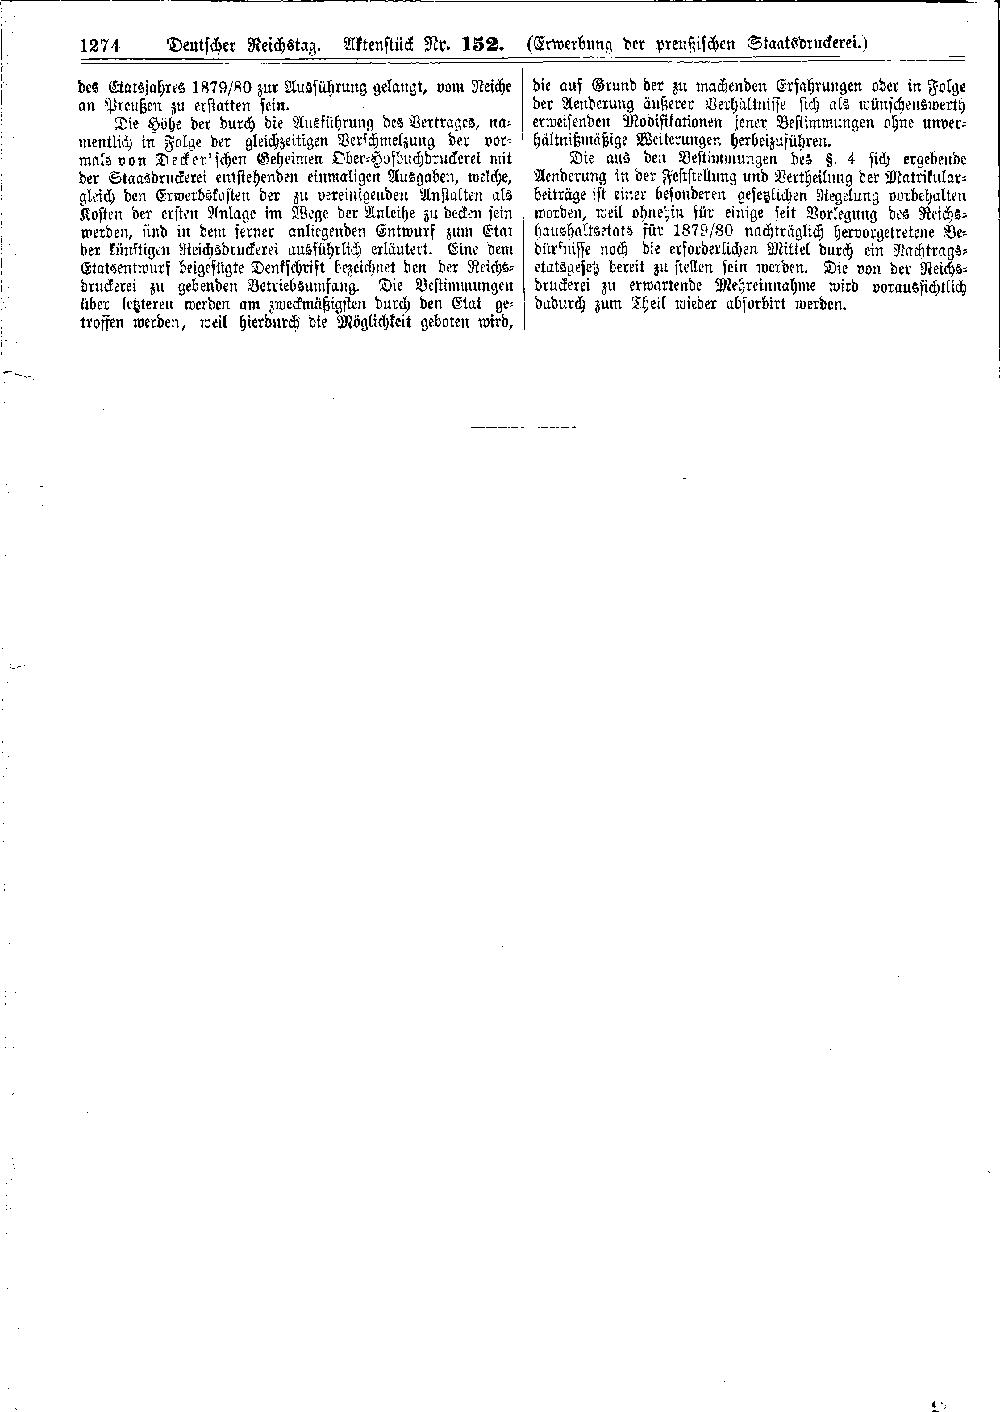 Scan of page 1274